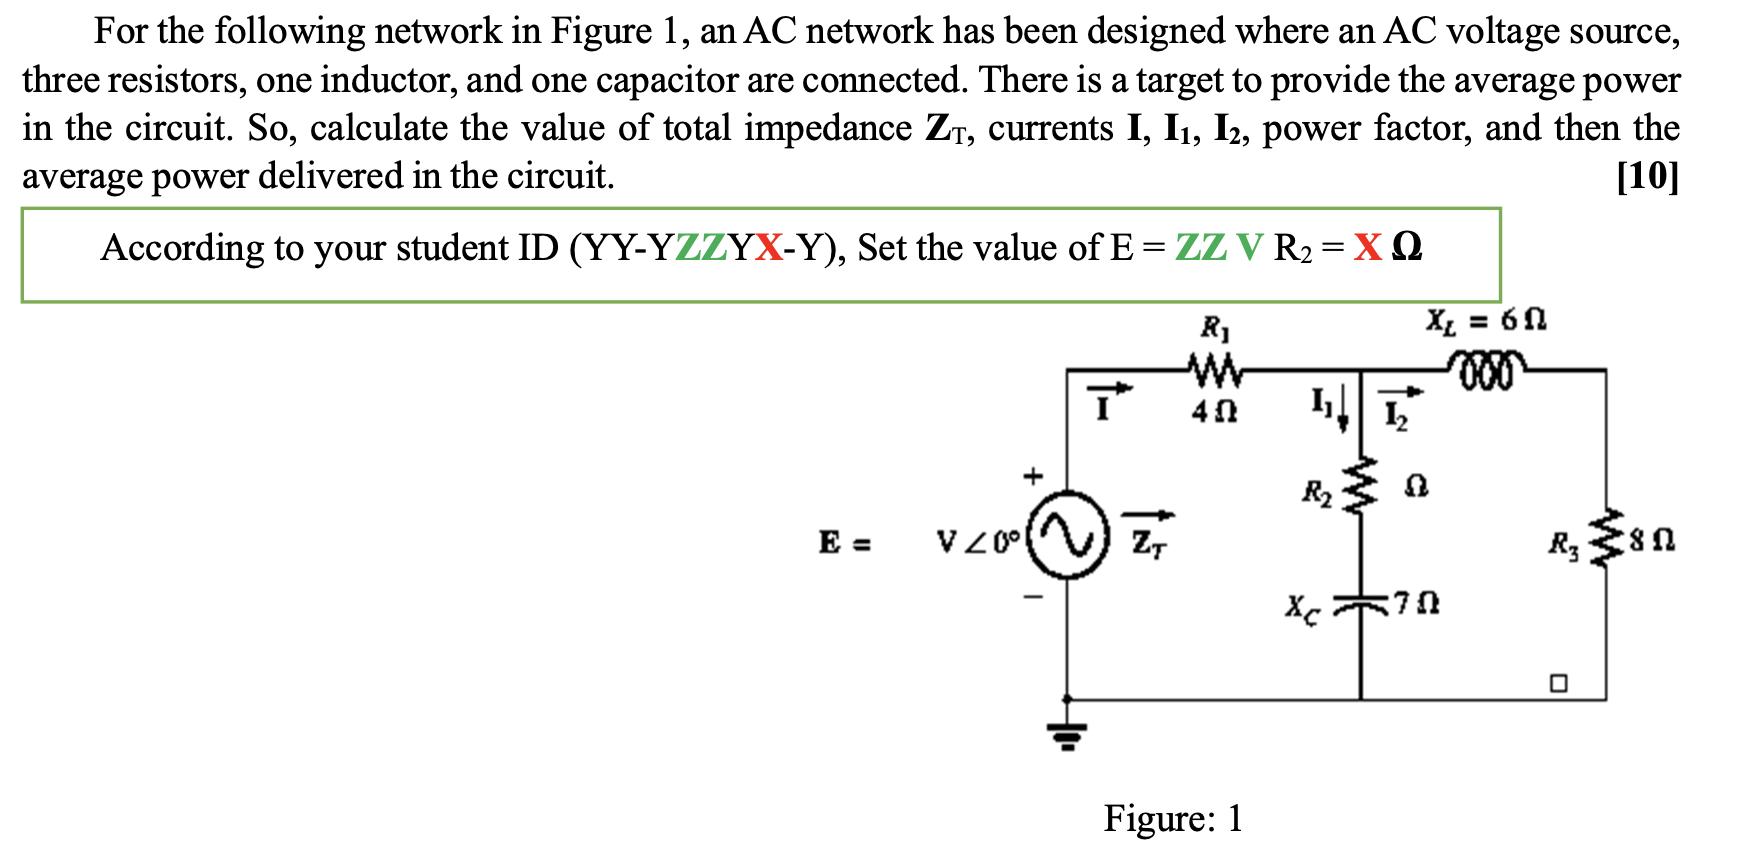 For the following network in Figure 1, an AC network has been designed where an AC voltage source, three